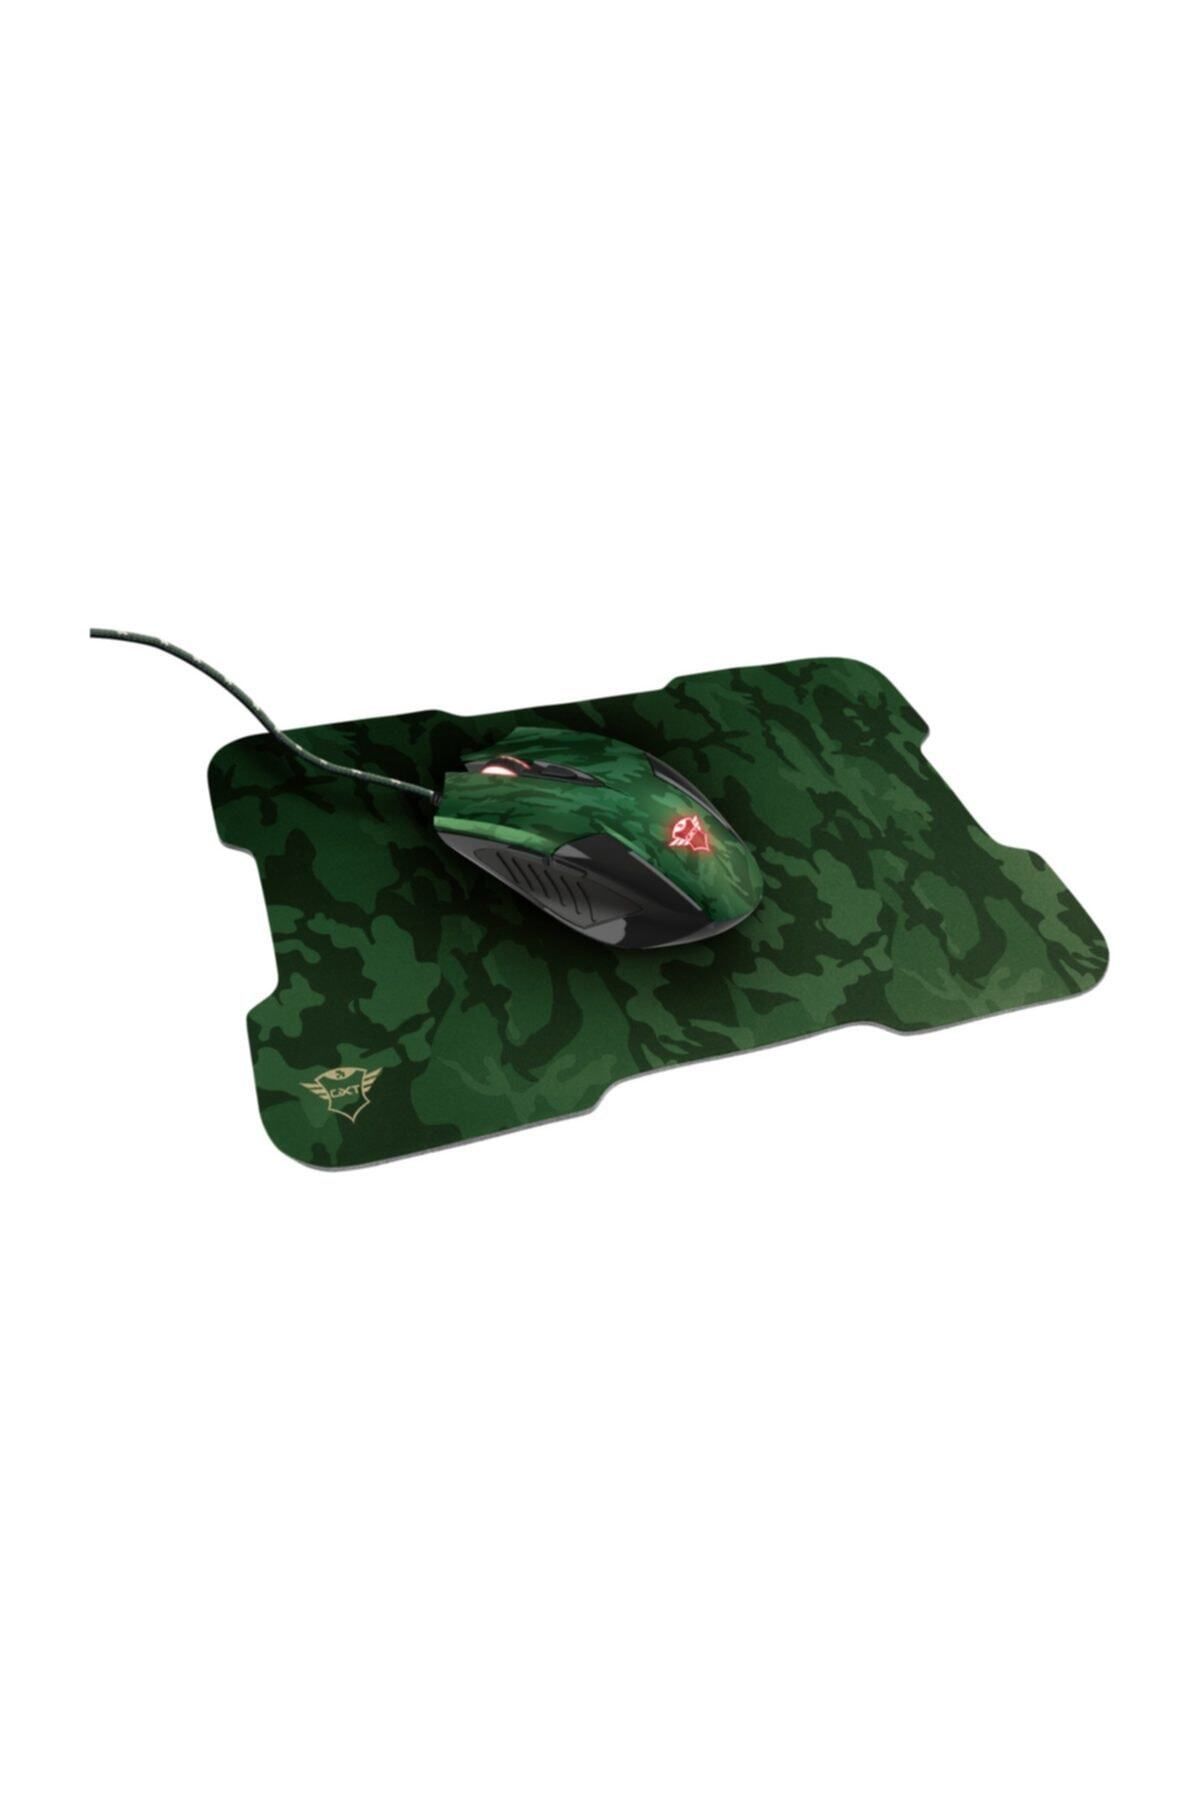 Trust Gxt 781 Rixa Camo Gaming Mouse & Mouse Pad